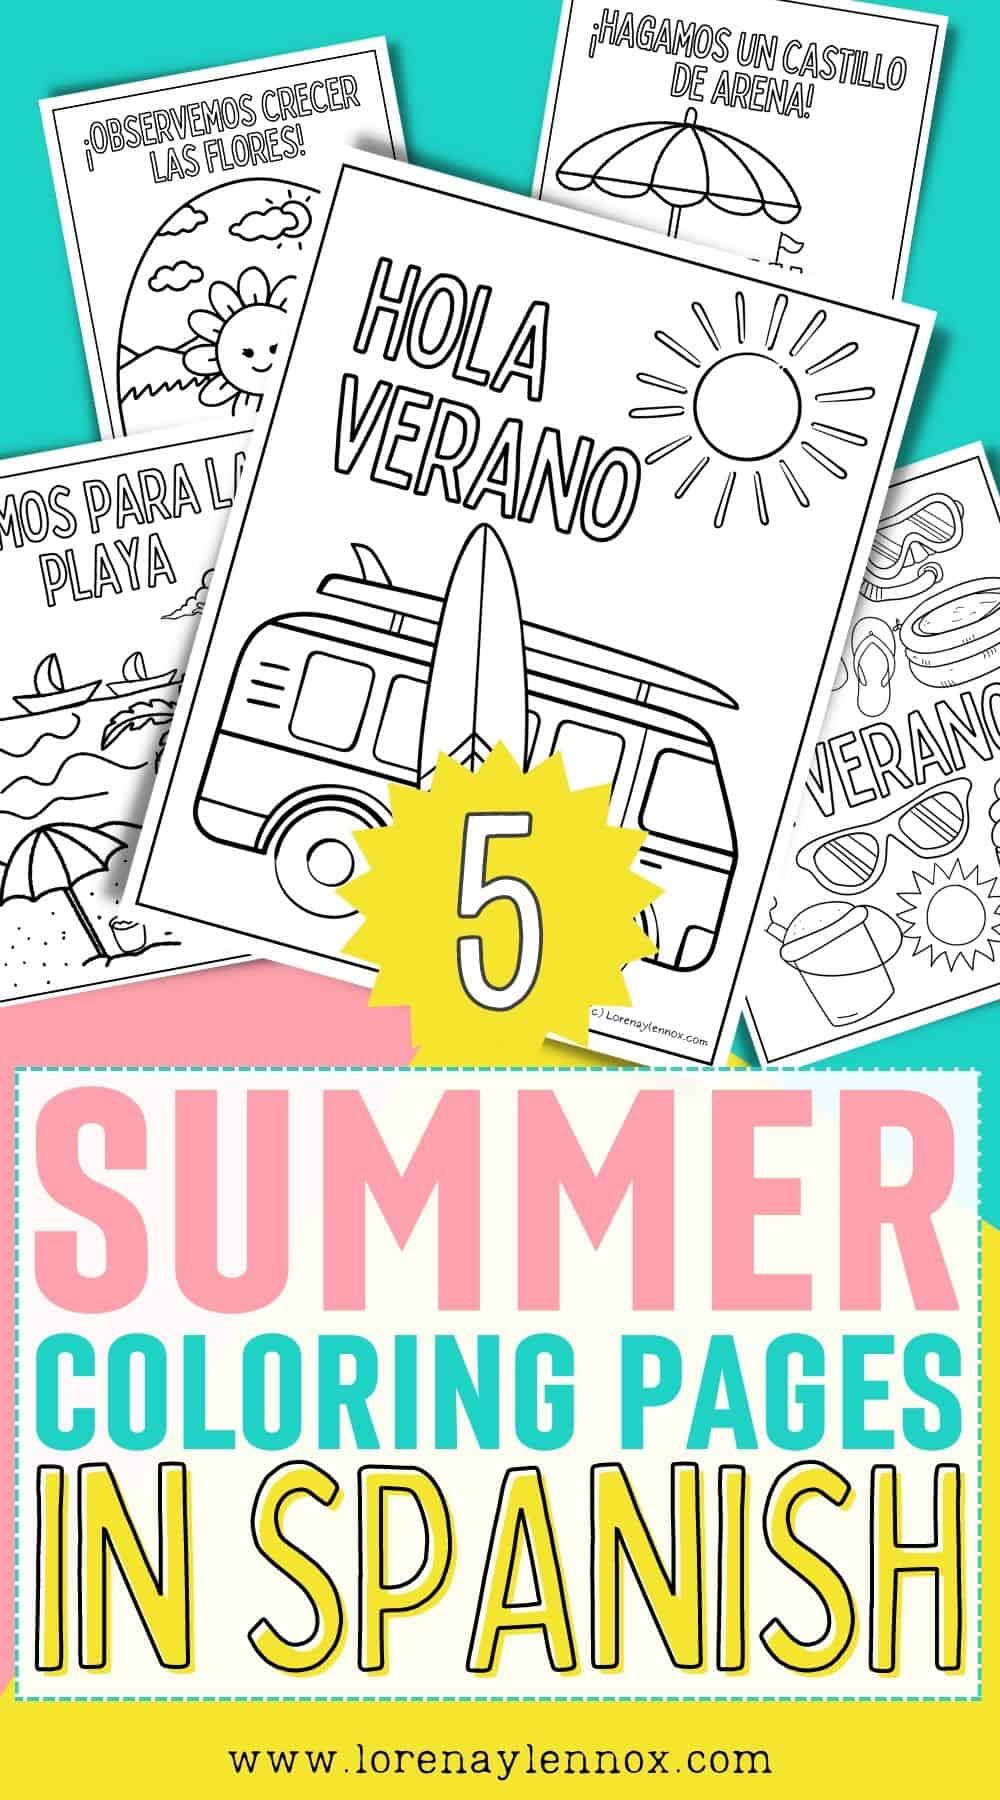 Summer coloring pages in spanish for kids free printables